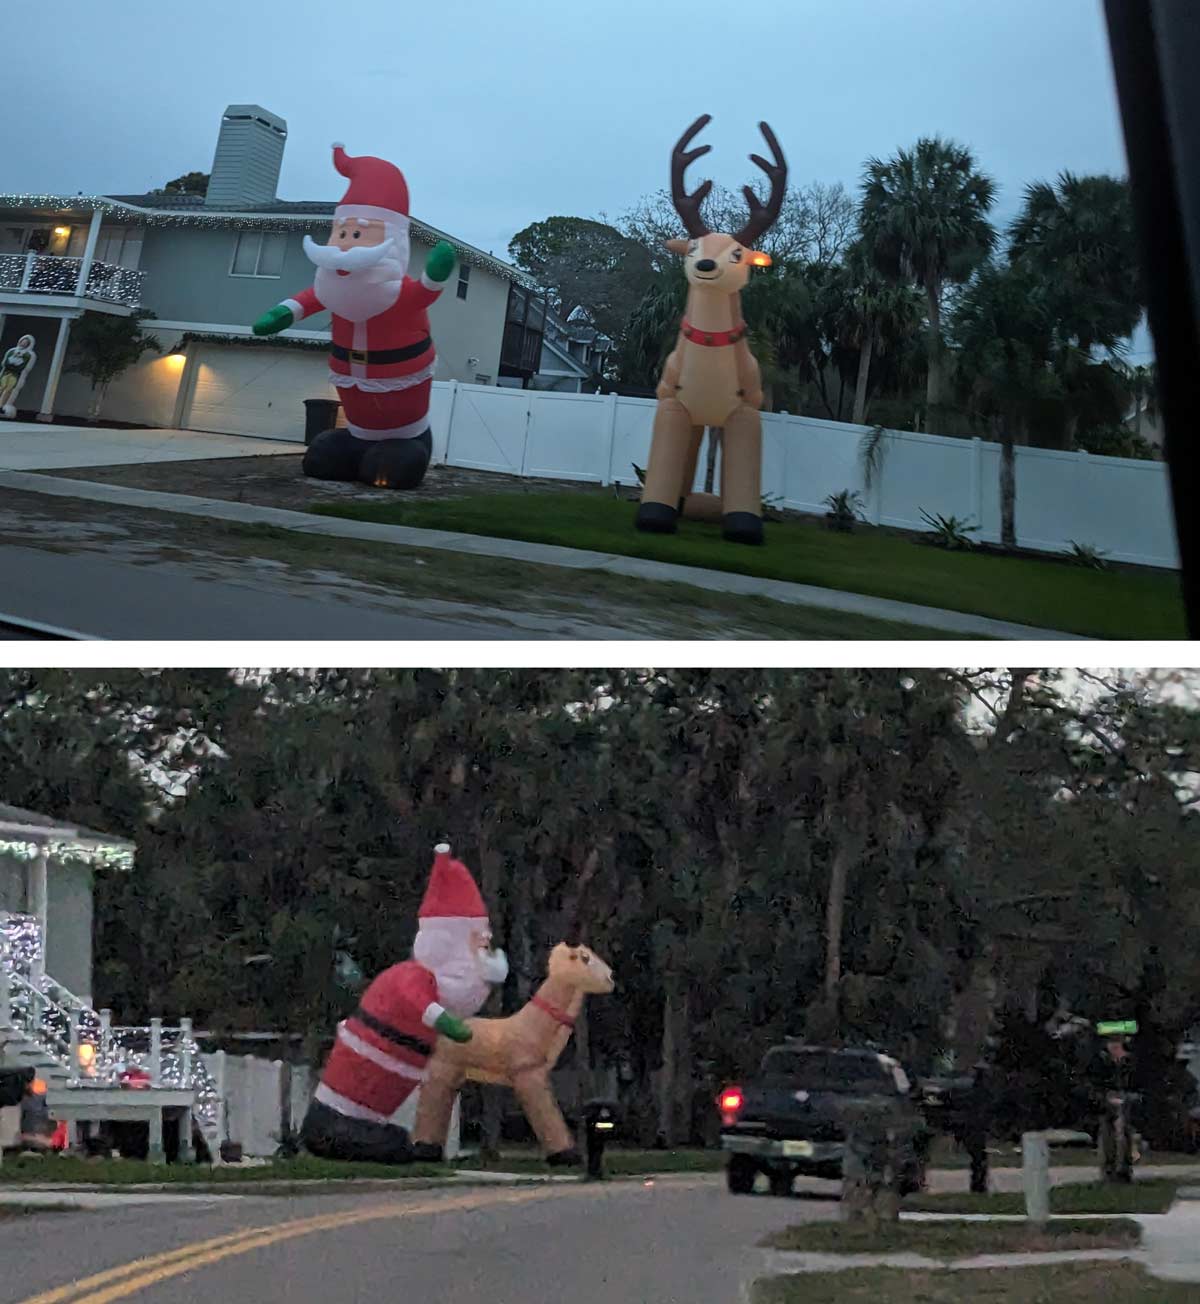 My neighbors Christmas decorations when viewed from farther down the road